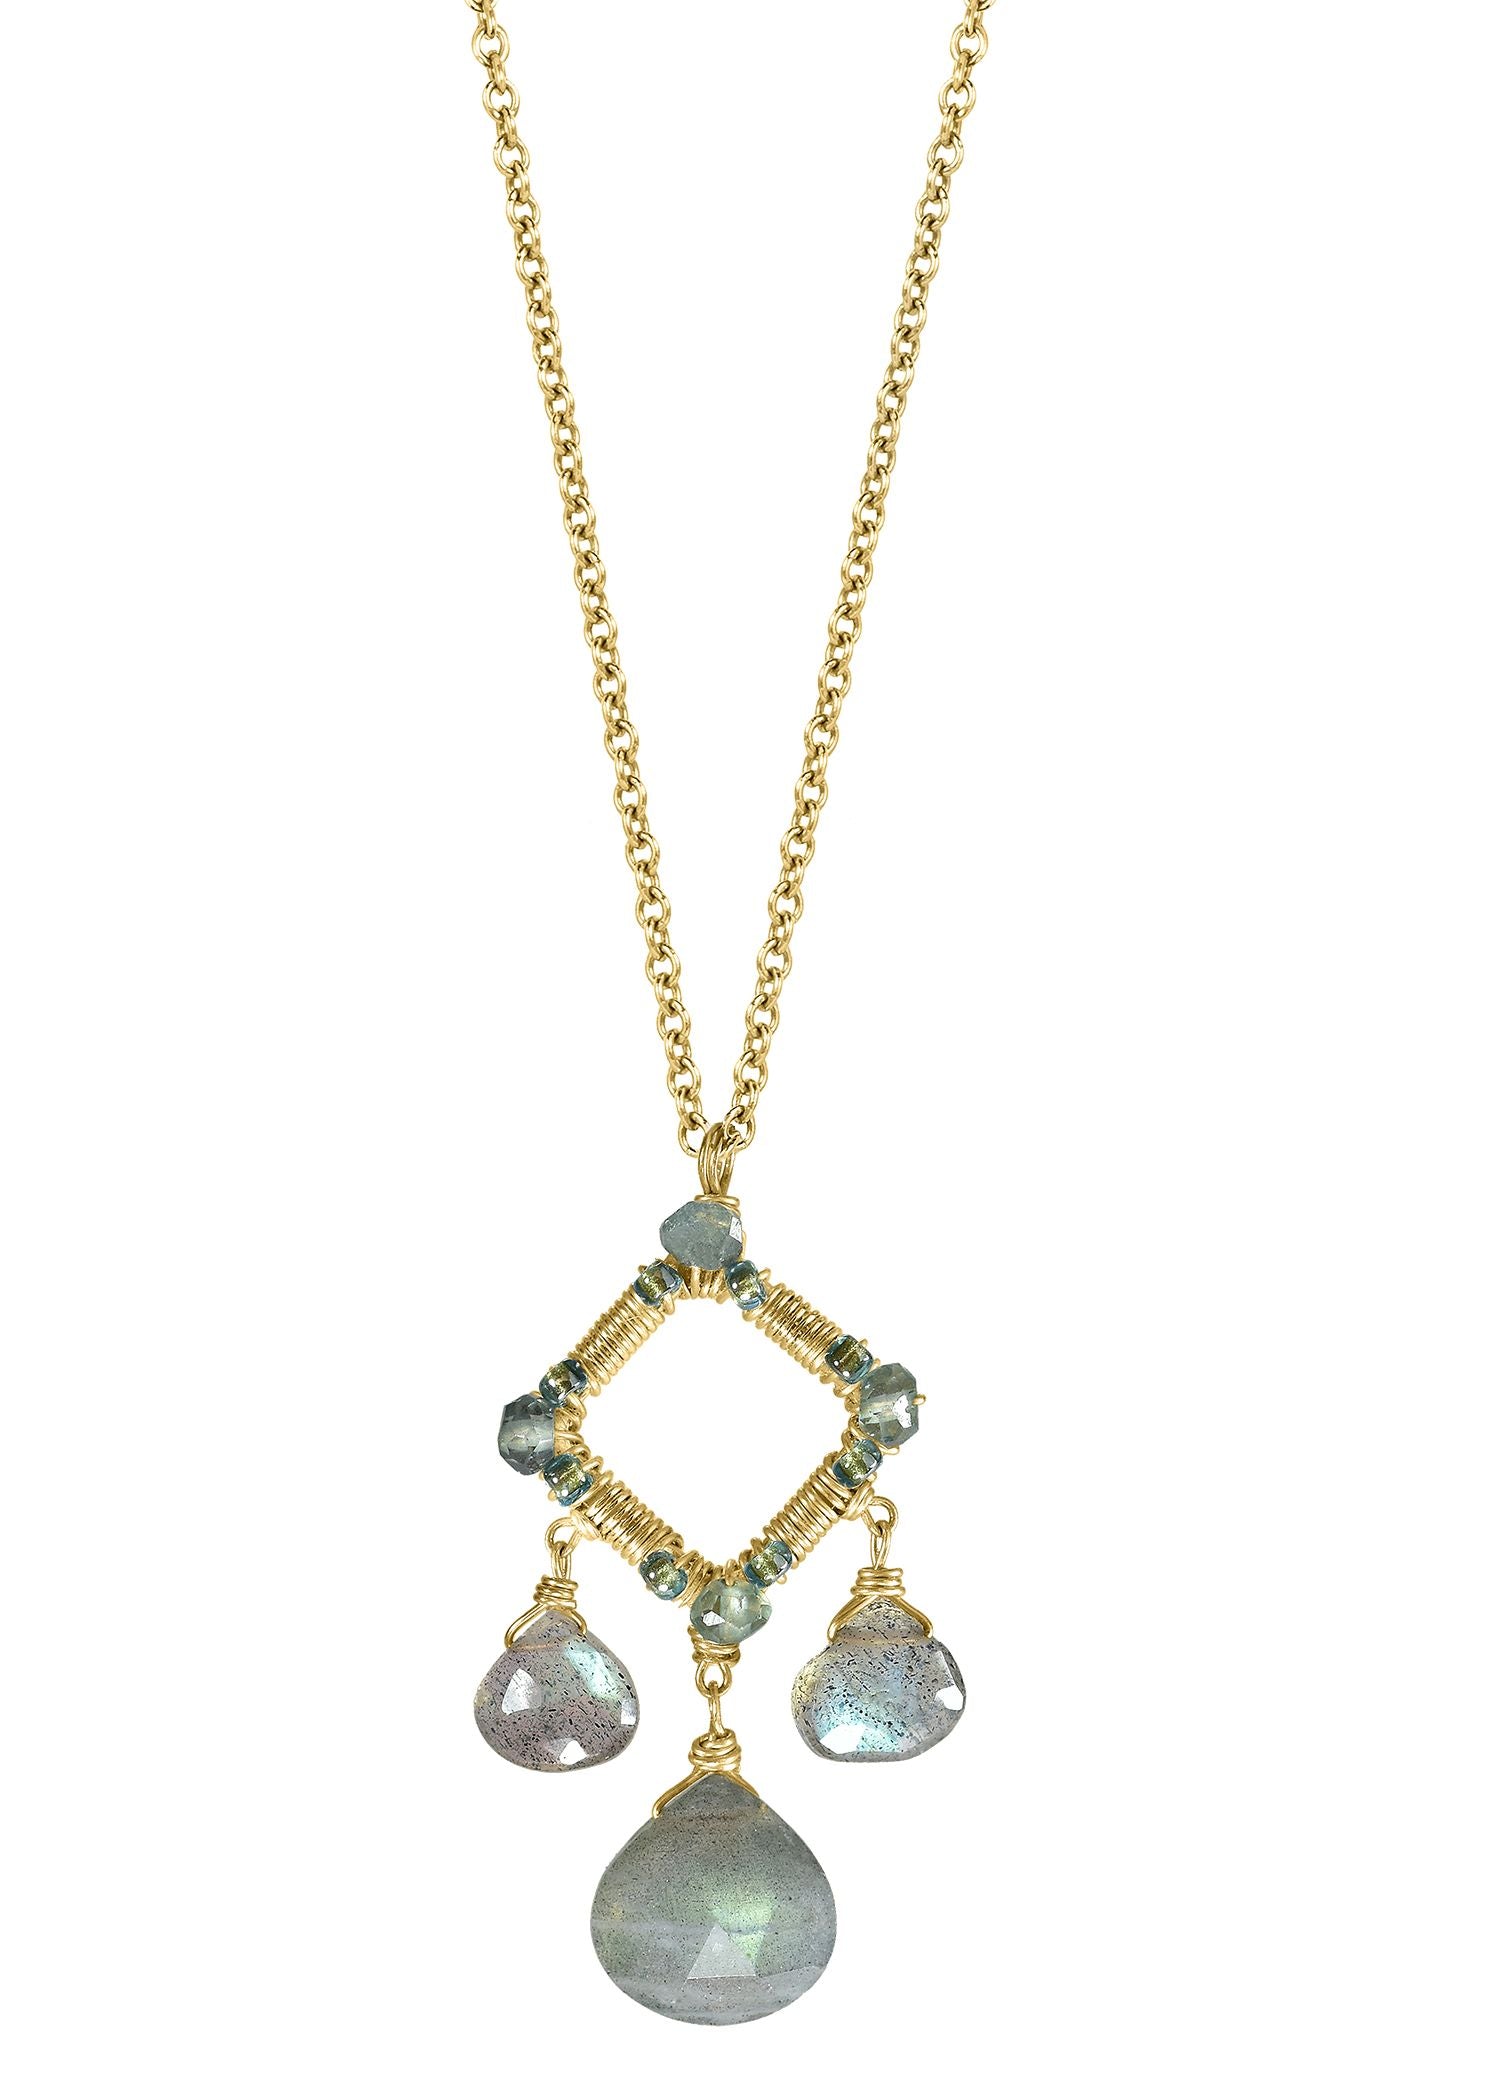 Labradorite Green quartz 14k gold fill Necklace measures 16” in length Pendant measures 1” in length and 13/16” in width Handmade in our Los Angeles studio